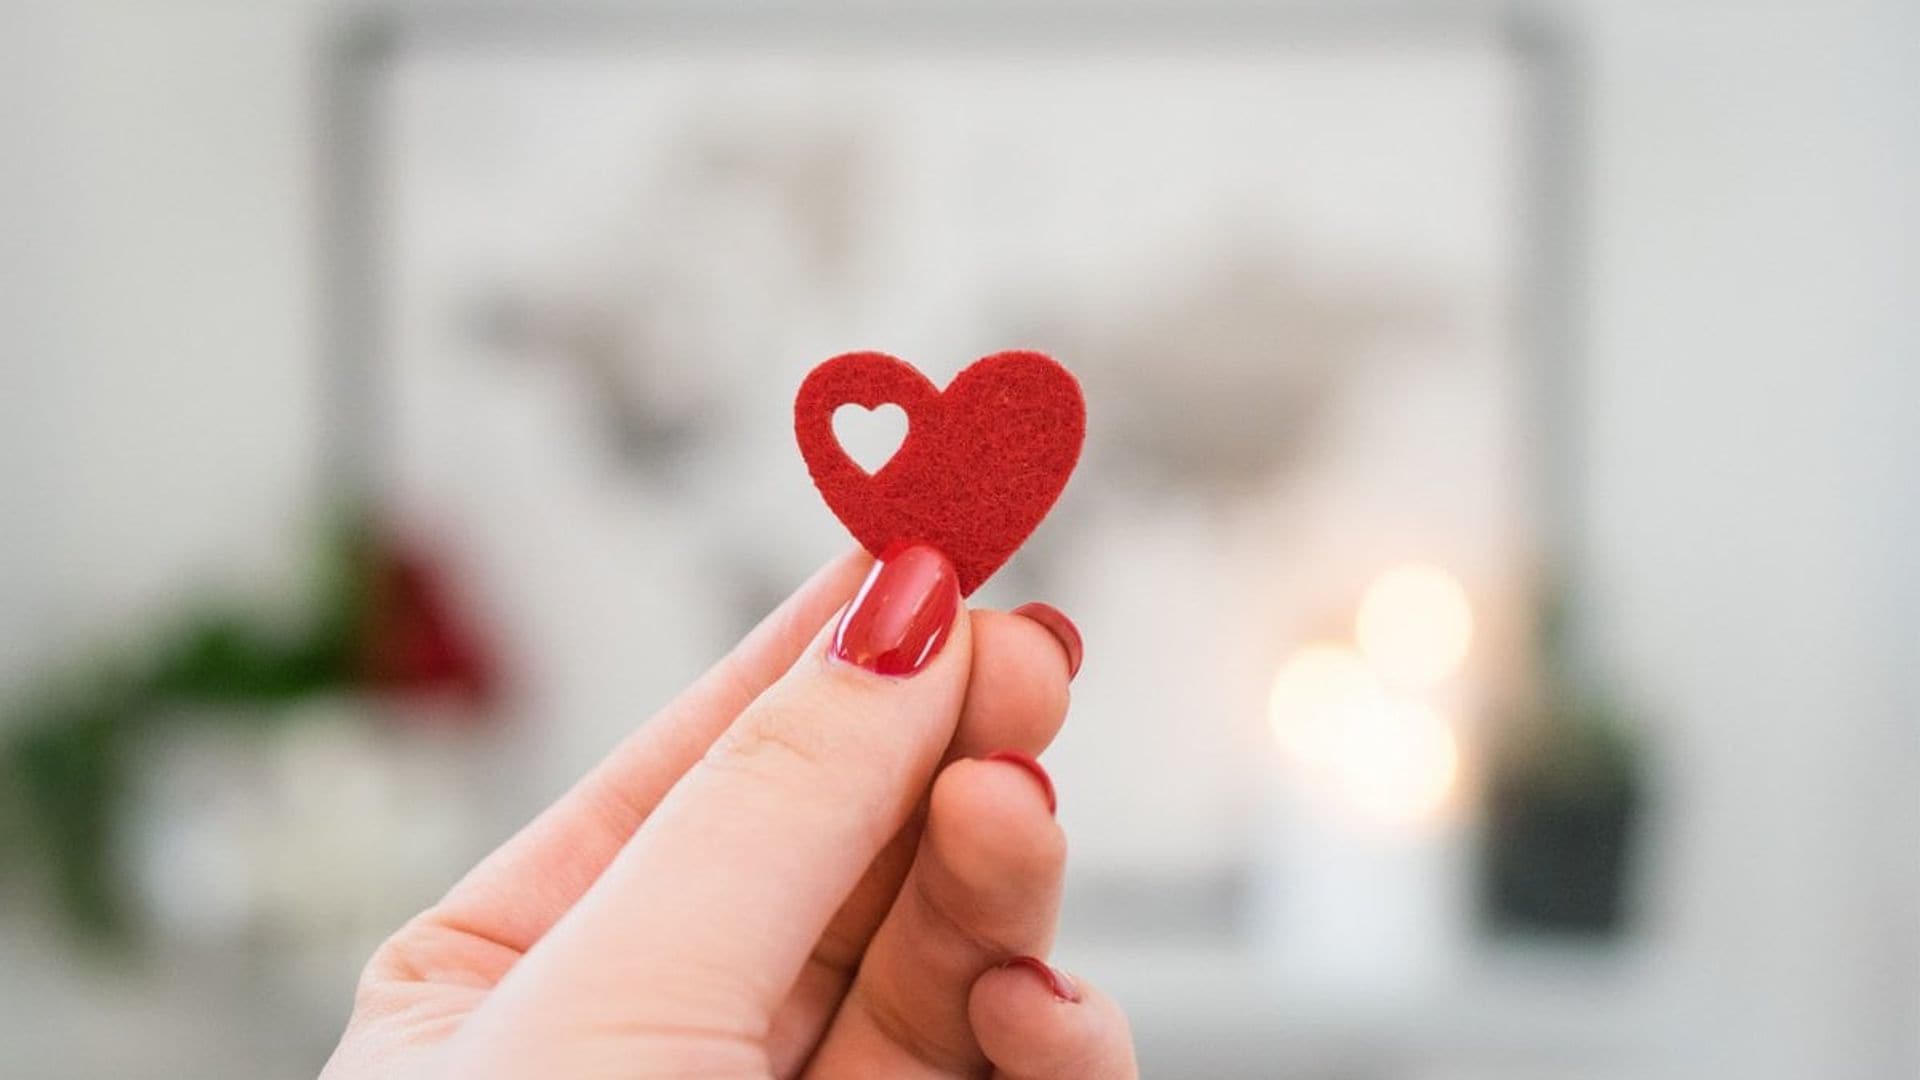 6 Tips to have a successful Valentine’s Day during COVID-19